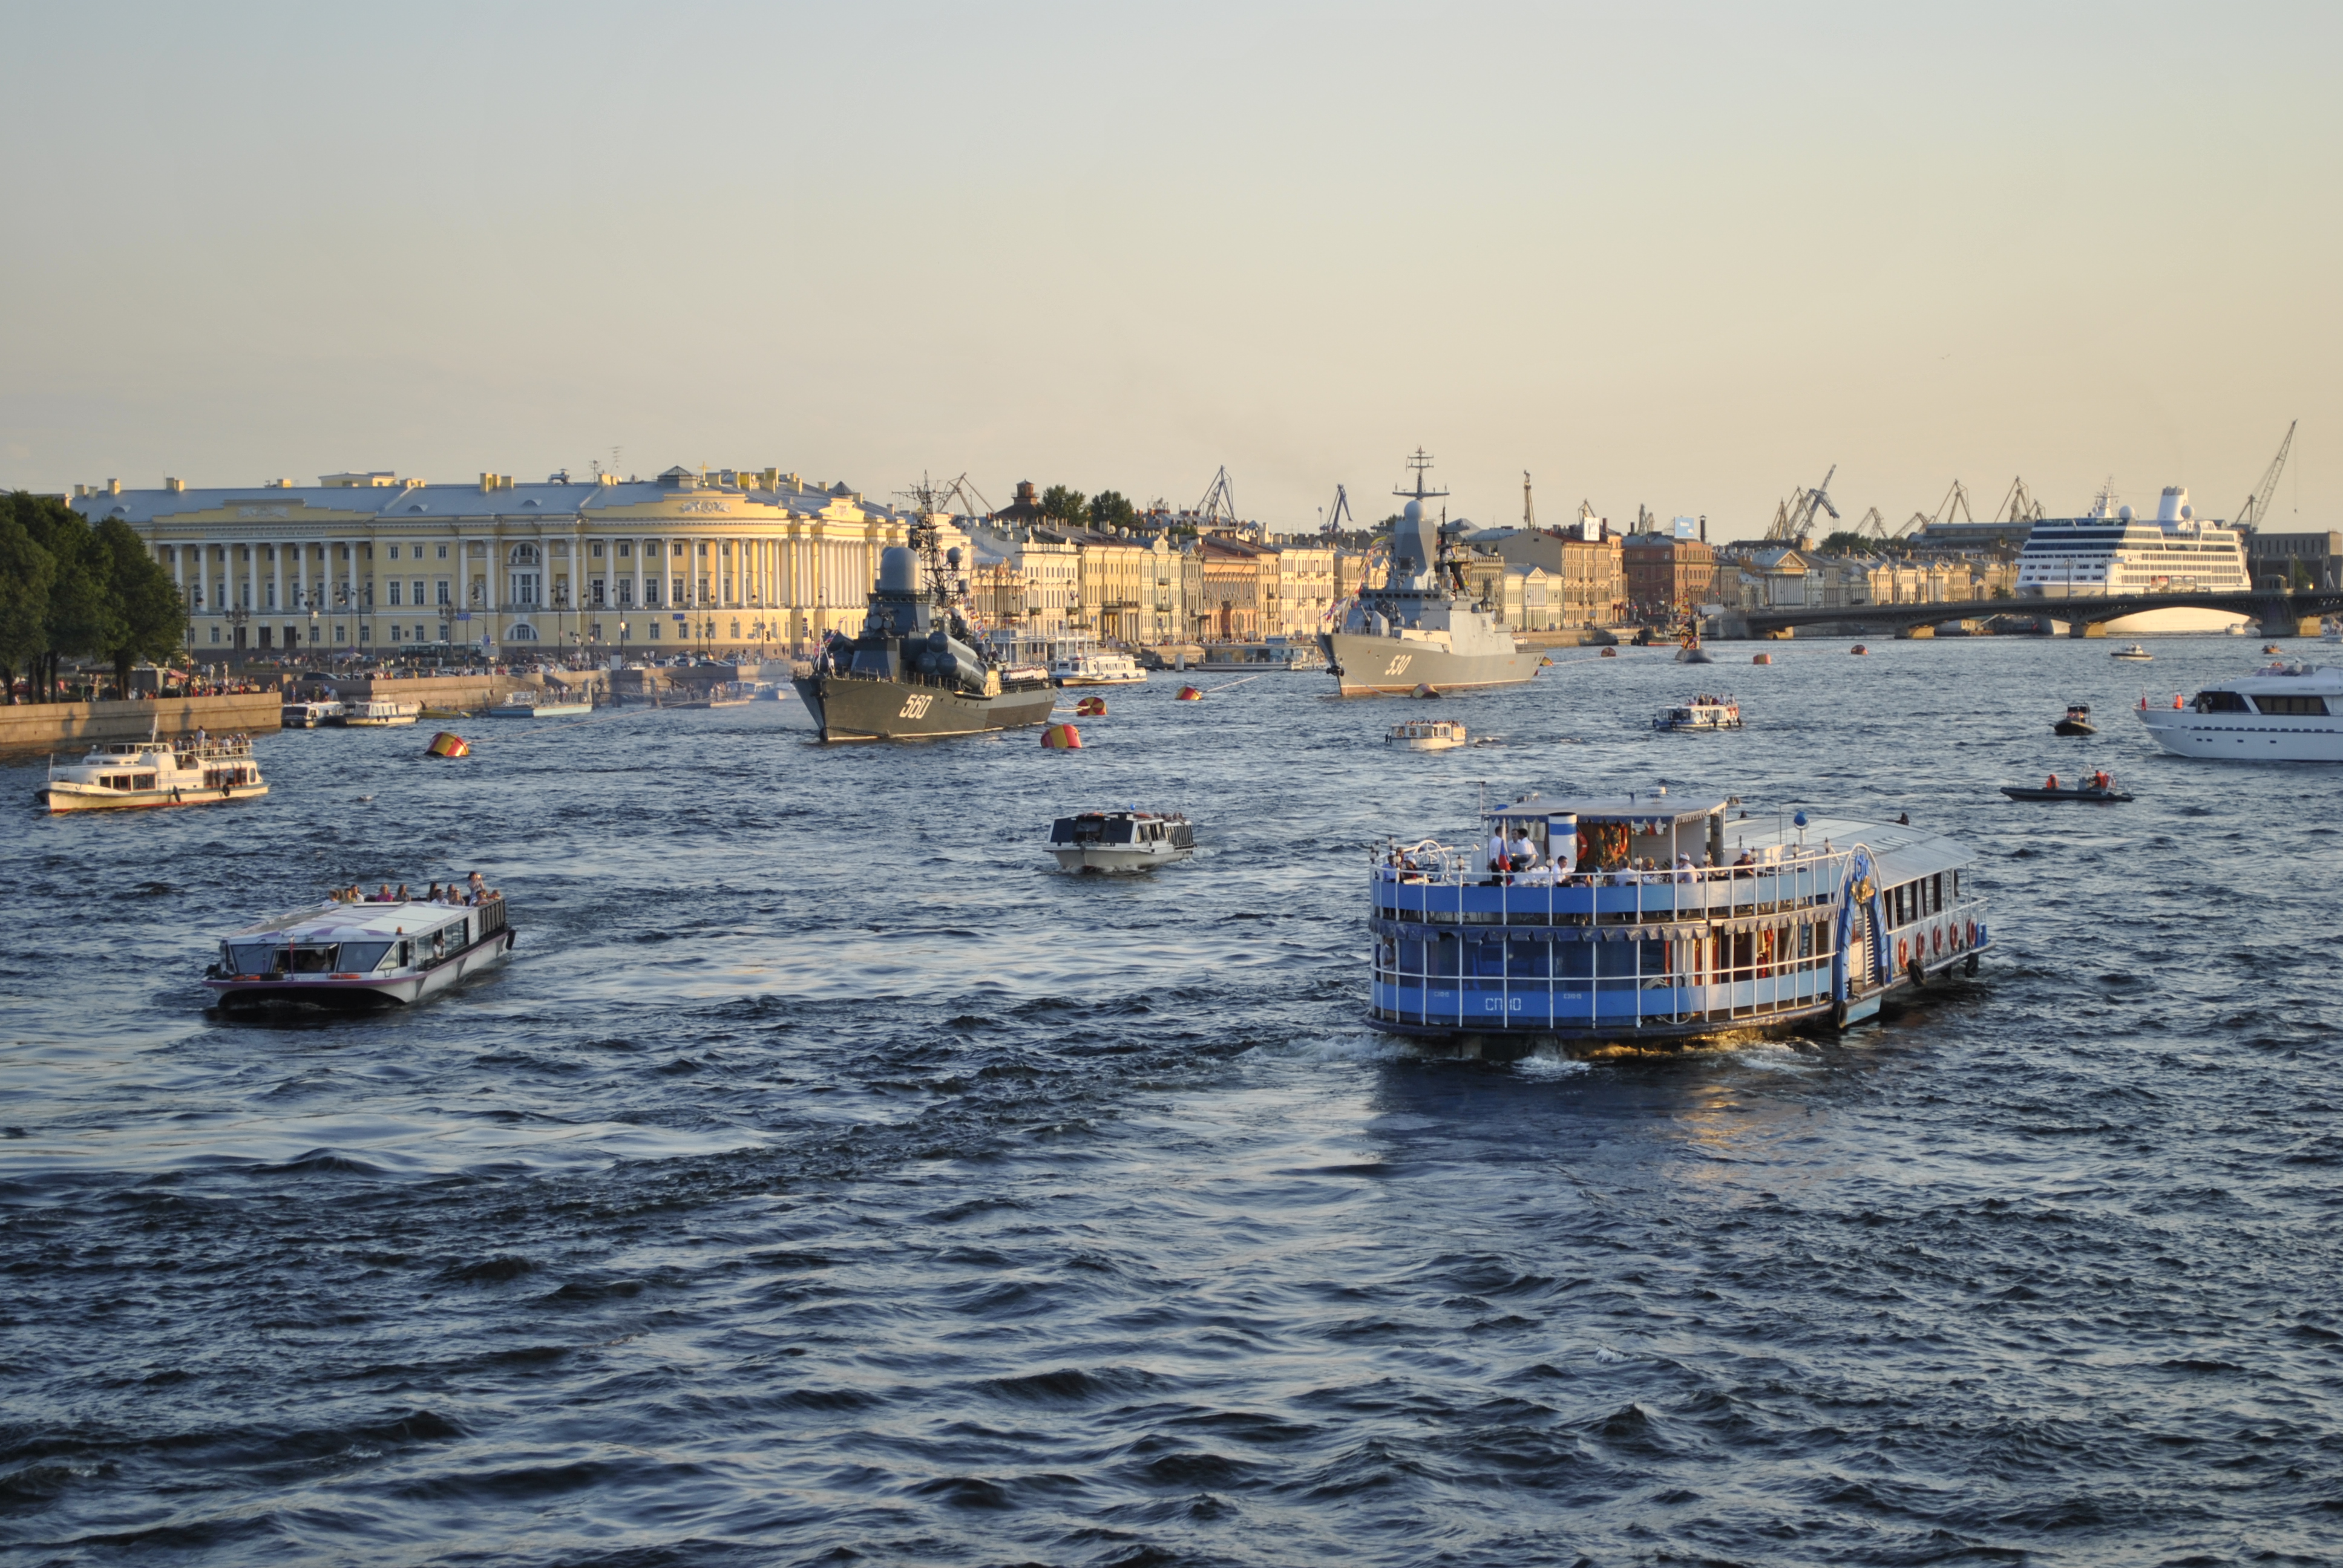 File:View on the Neva River from Palace Bridge.jpg - Wikimedia Commons